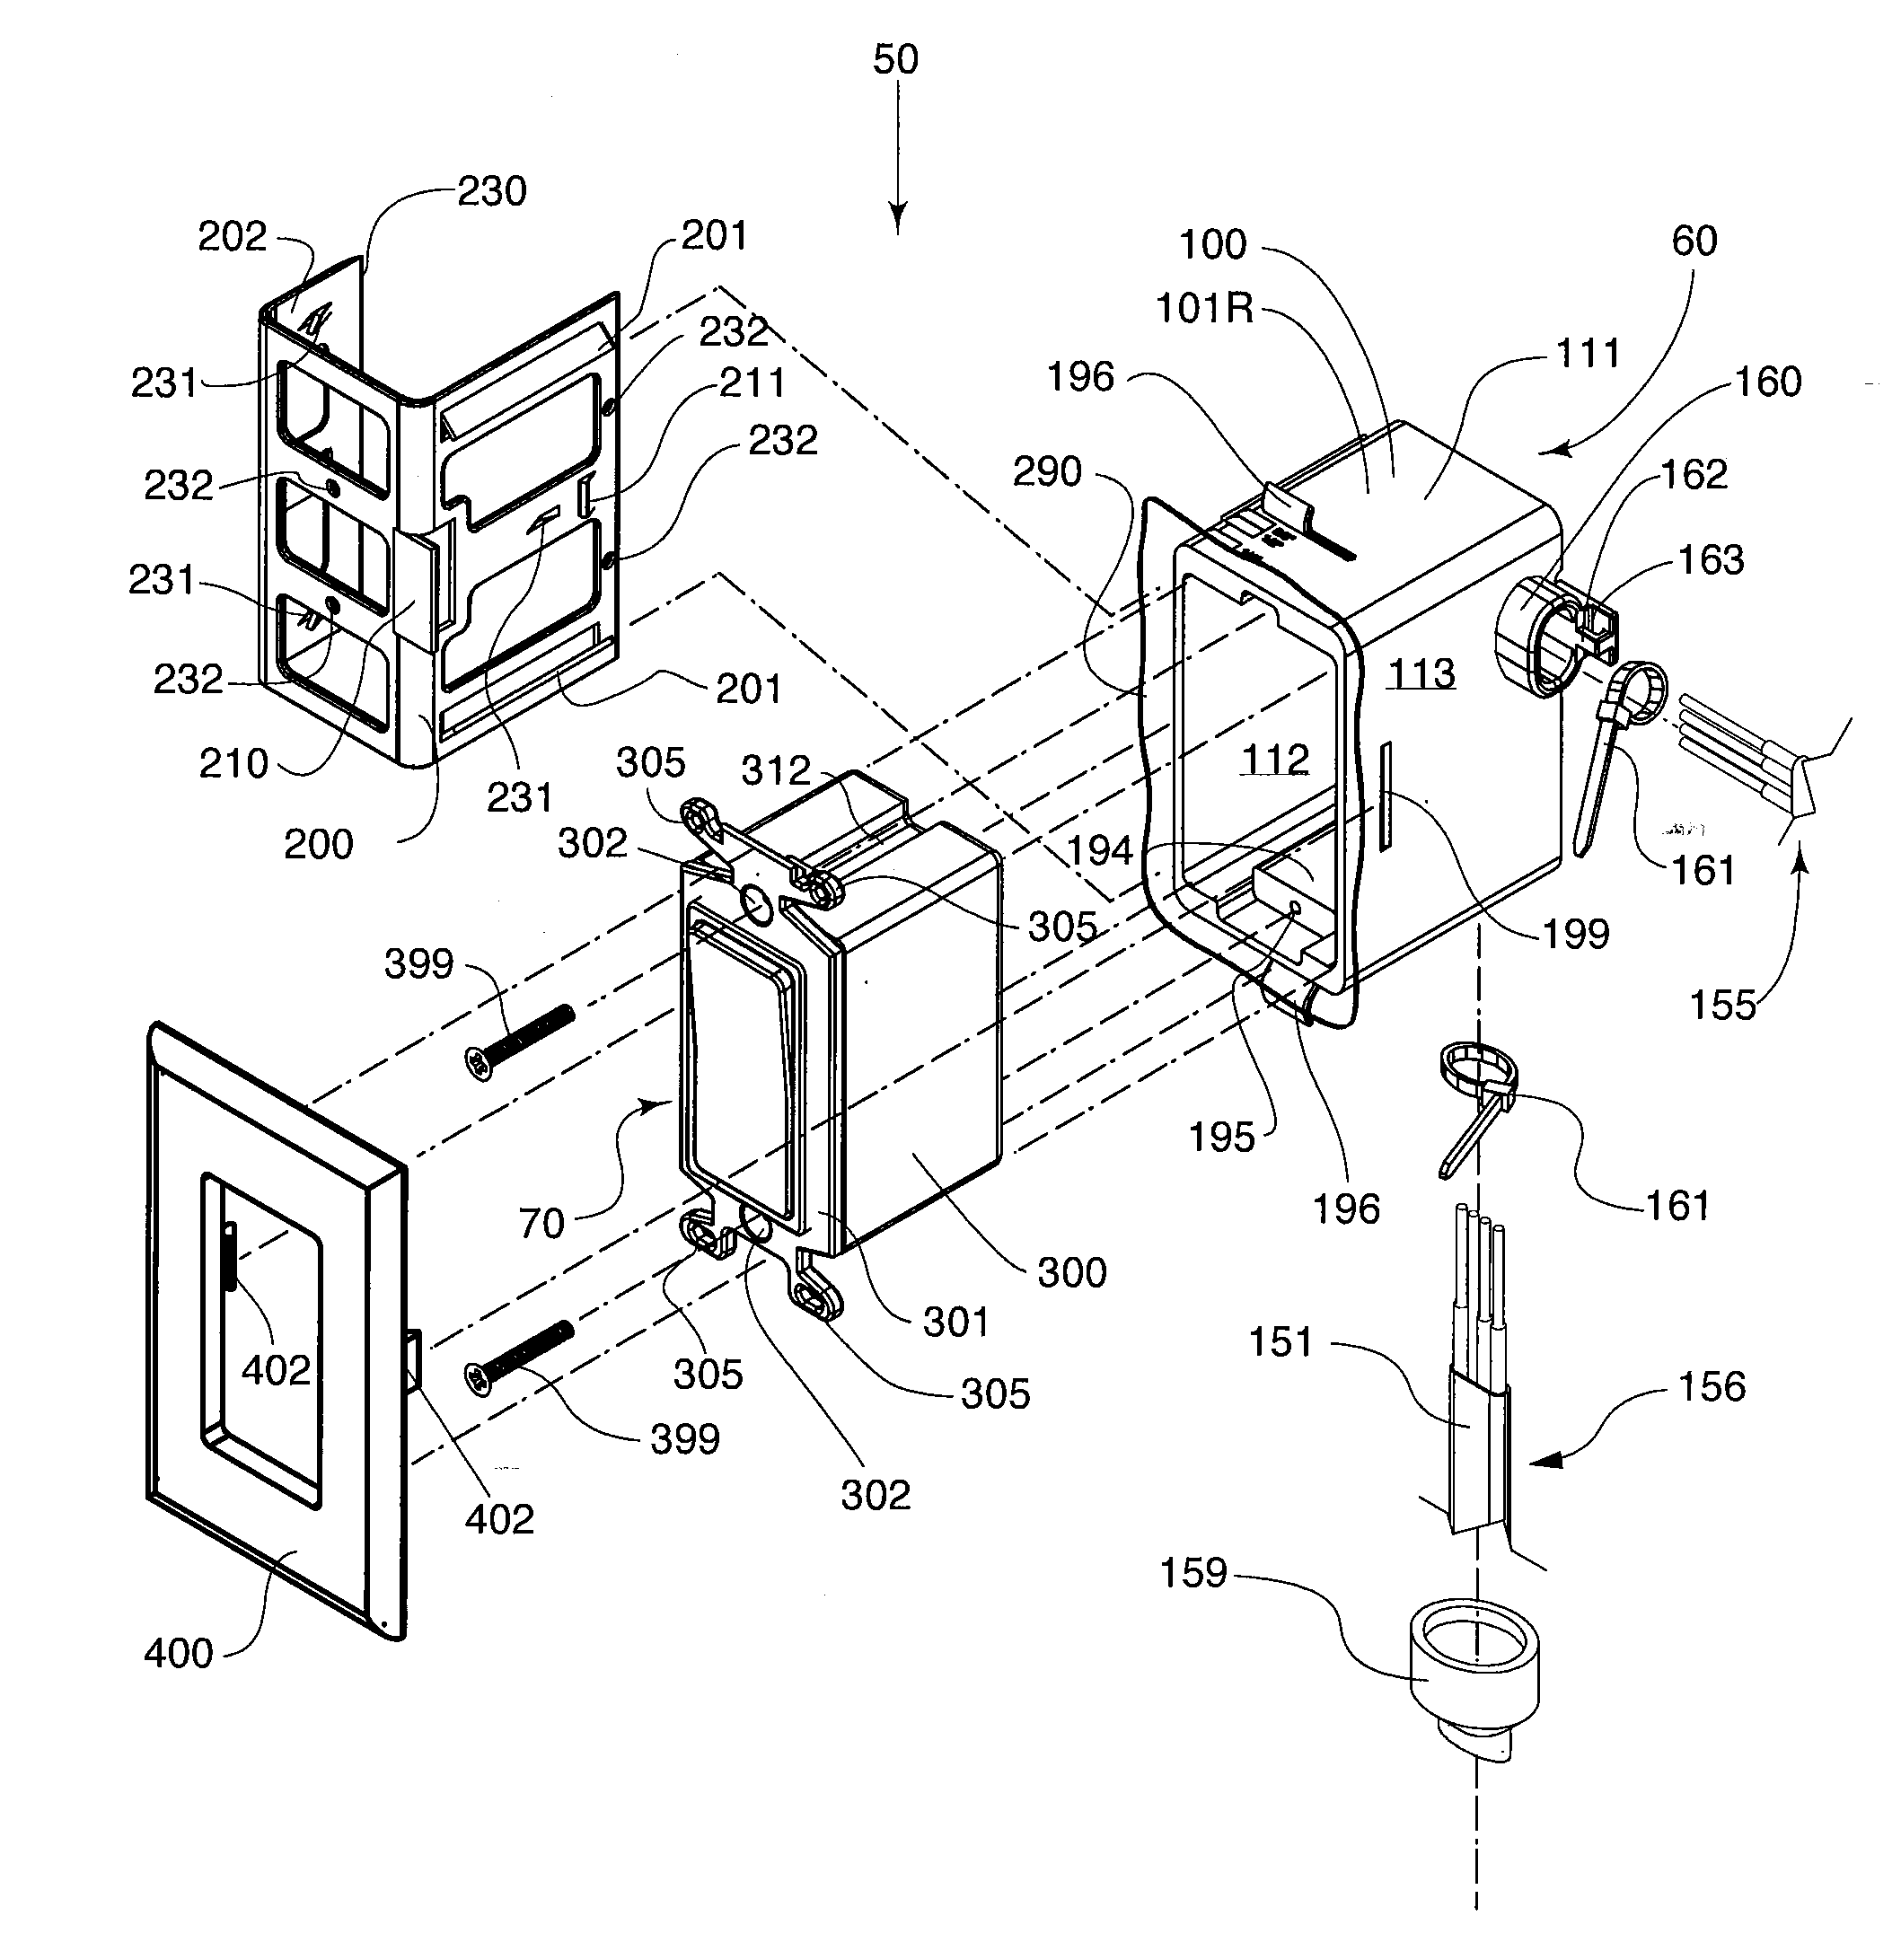 Electrical apparatus having quick connect components